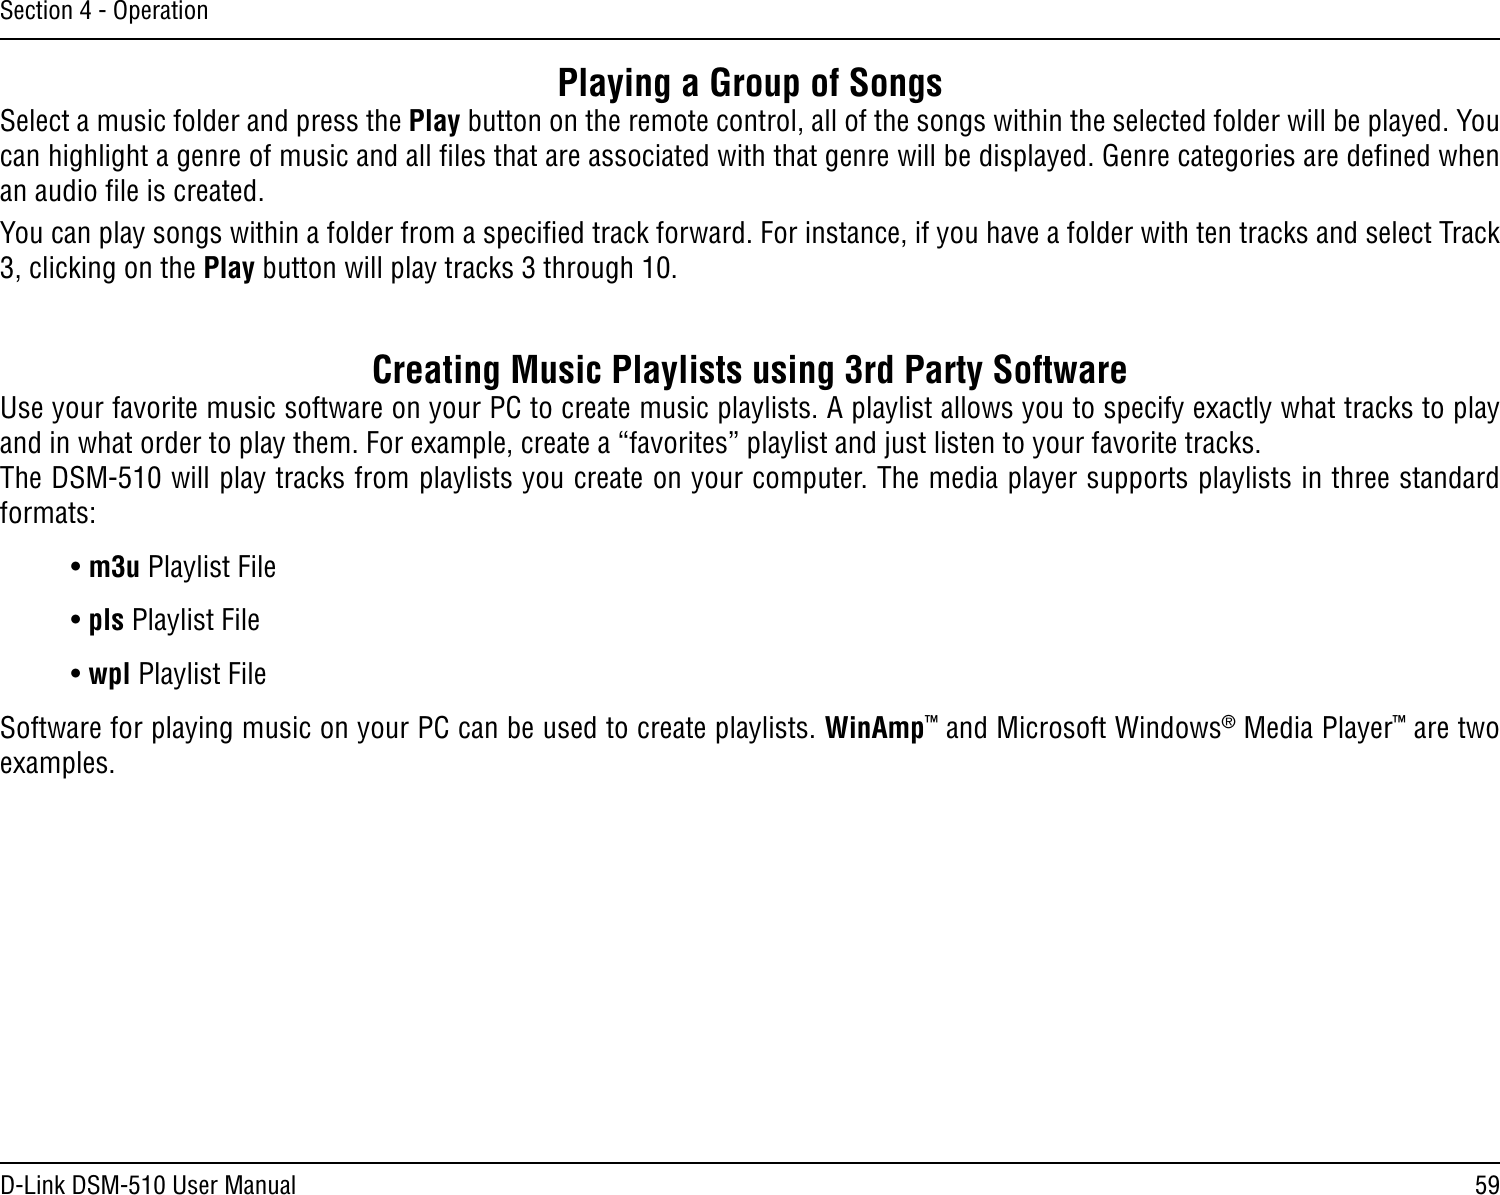 59D-Link DSM-510 User ManualSection 4 - OperationPlaying a Group of SongsSelect a music folder and press the Play button on the remote control, all of the songs within the selected folder will be played. You can highlight a genre of music and all ﬁles that are associated with that genre will be displayed. Genre categories are deﬁned when an audio ﬁle is created. You can play songs within a folder from a speciﬁed track forward. For instance, if you have a folder with ten tracks and select Track 3, clicking on the Play button will play tracks 3 through 10.       Creating Music Playlists using 3rd Party SoftwareUse your favorite music software on your PC to create music playlists. A playlist allows you to specify exactly what tracks to play and in what order to play them. For example, create a “favorites” playlist and just listen to your favorite tracks. The DSM-510 will play tracks from playlists you create on your computer. The media player supports playlists in three standard formats:• m3u Playlist File• pls Playlist File• wpl Playlist FileSoftware for playing music on your PC can be used to create playlists. WinAmp™ and Microsoft Windows® Media Player™ are two examples.